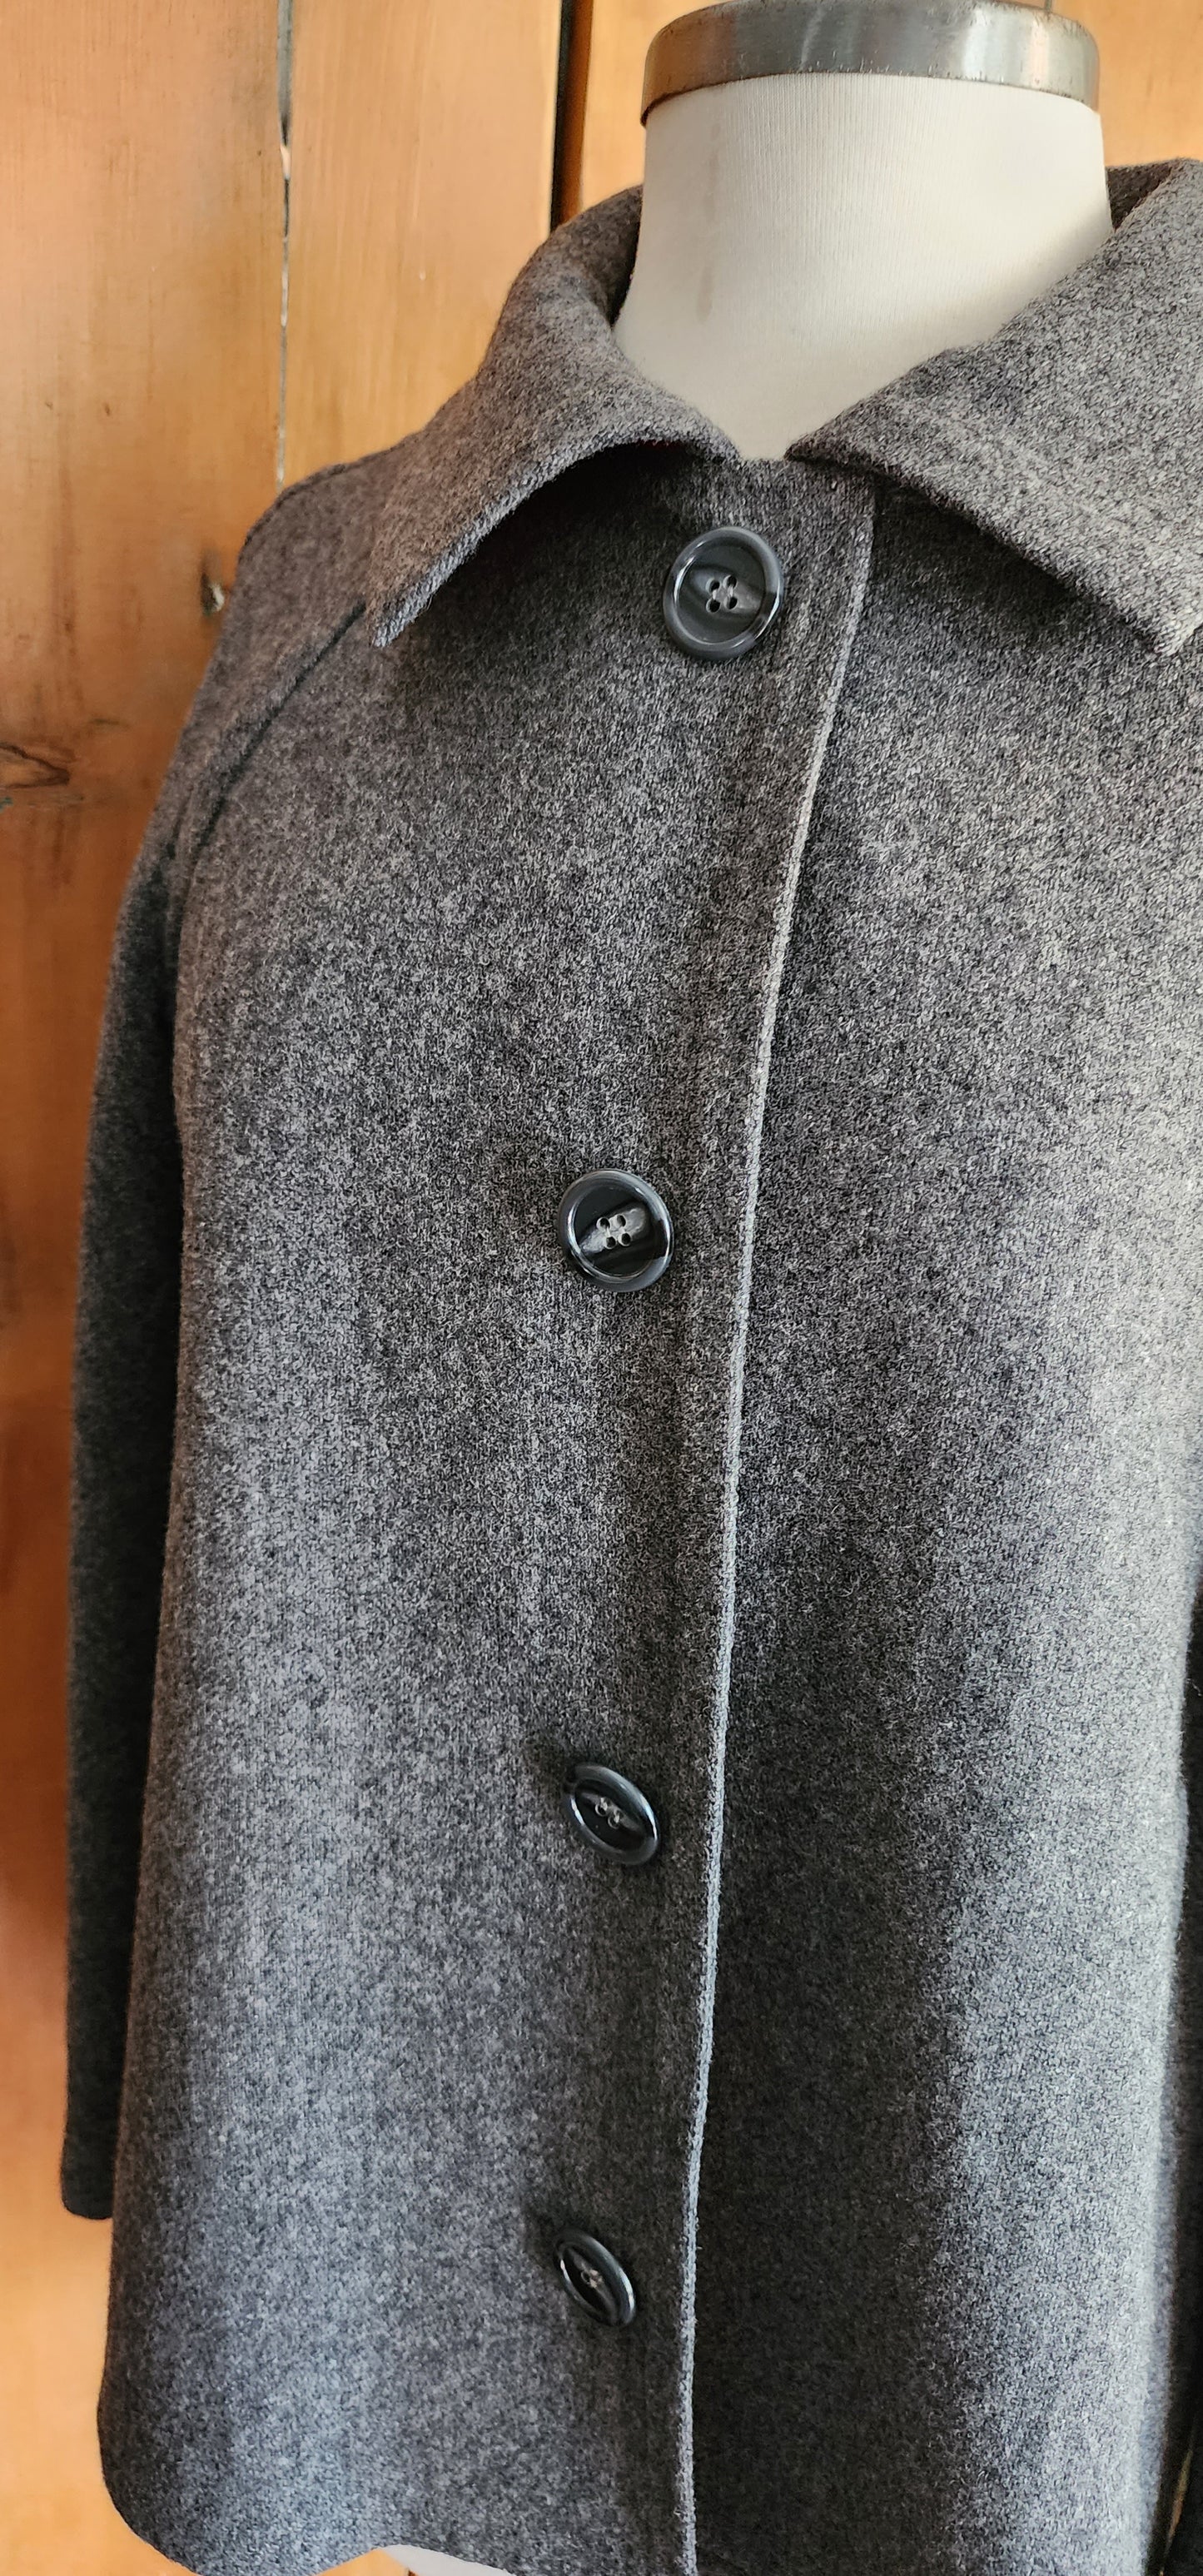 60s Gray Wool Jacket Red Lining